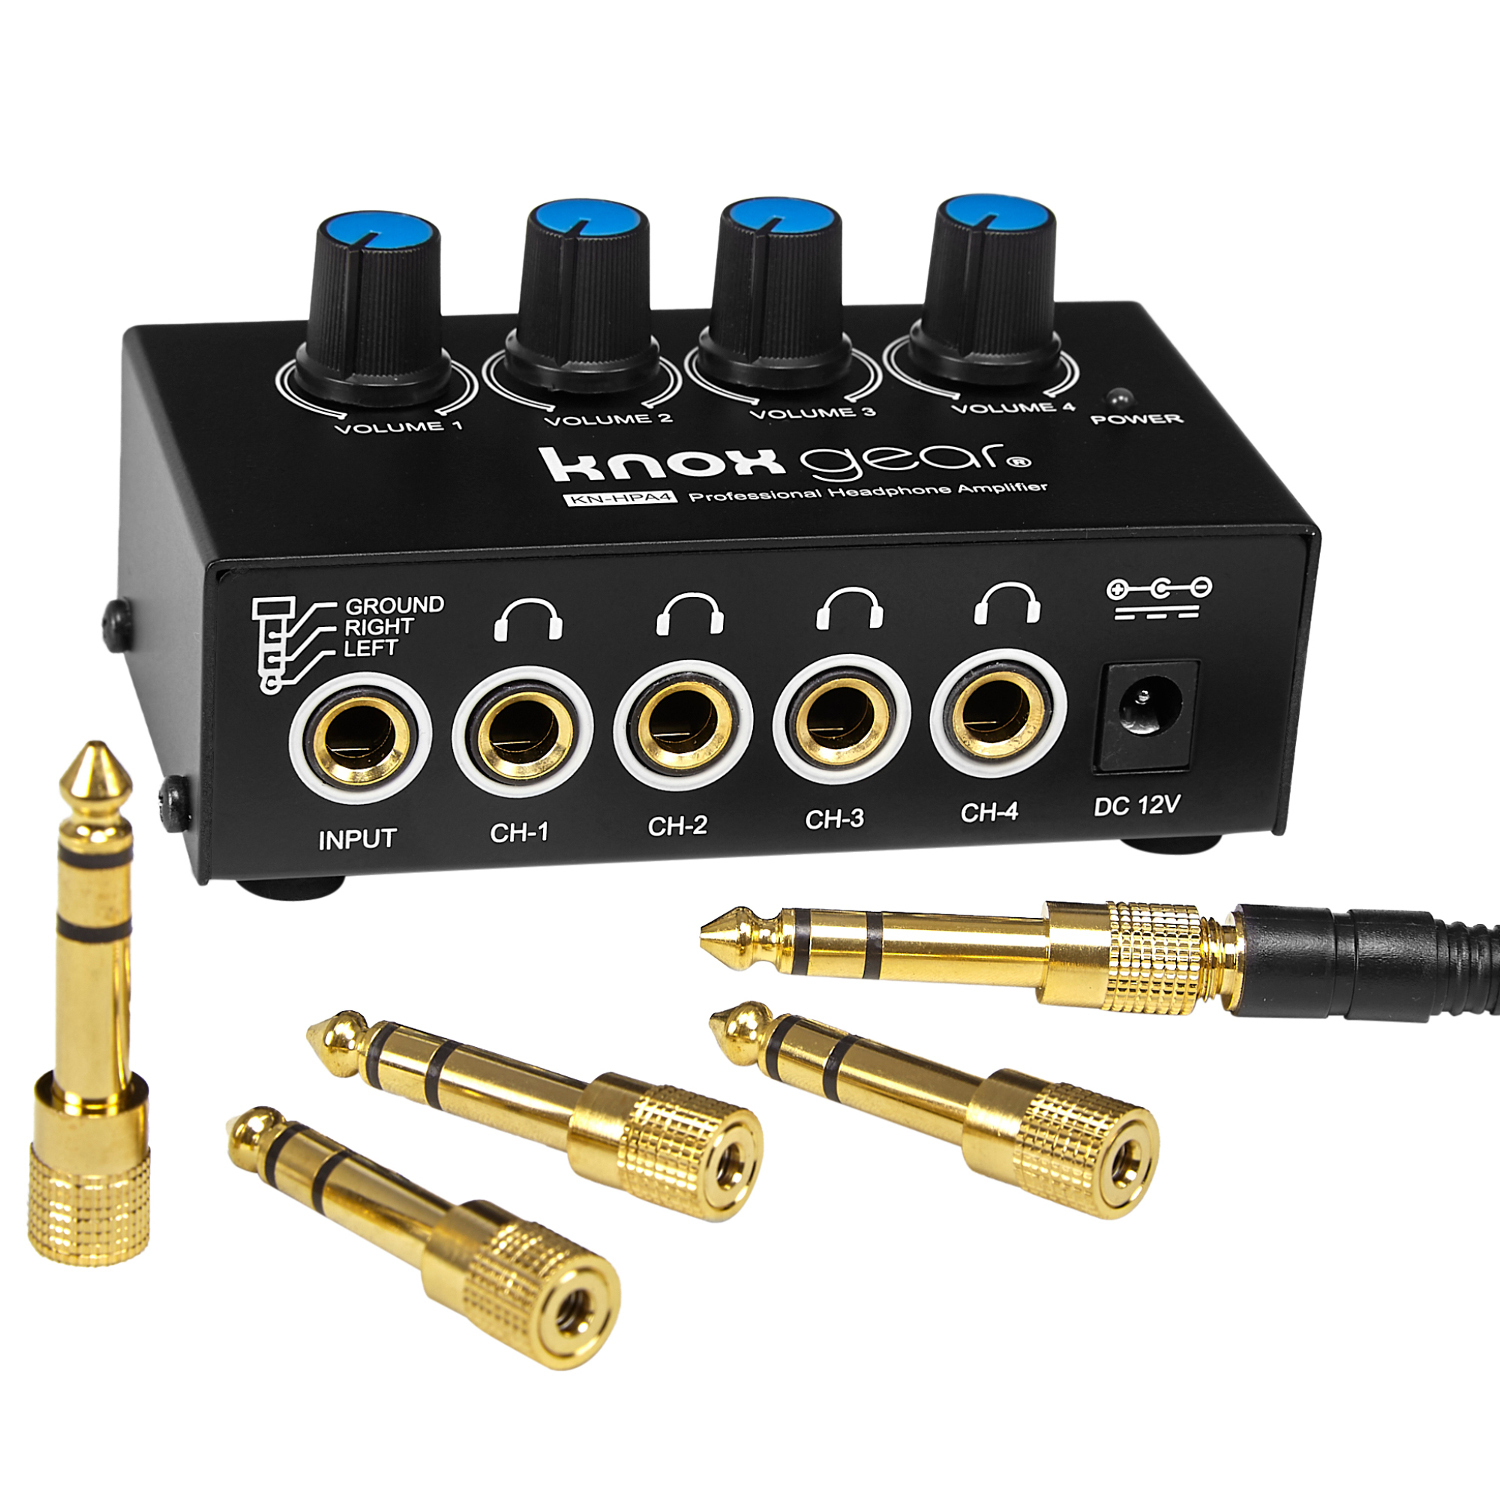 Knox Gear Compact 4-Channel Stereo Headphone Amplifier with DC 12V Power Adapter - image 1 of 6